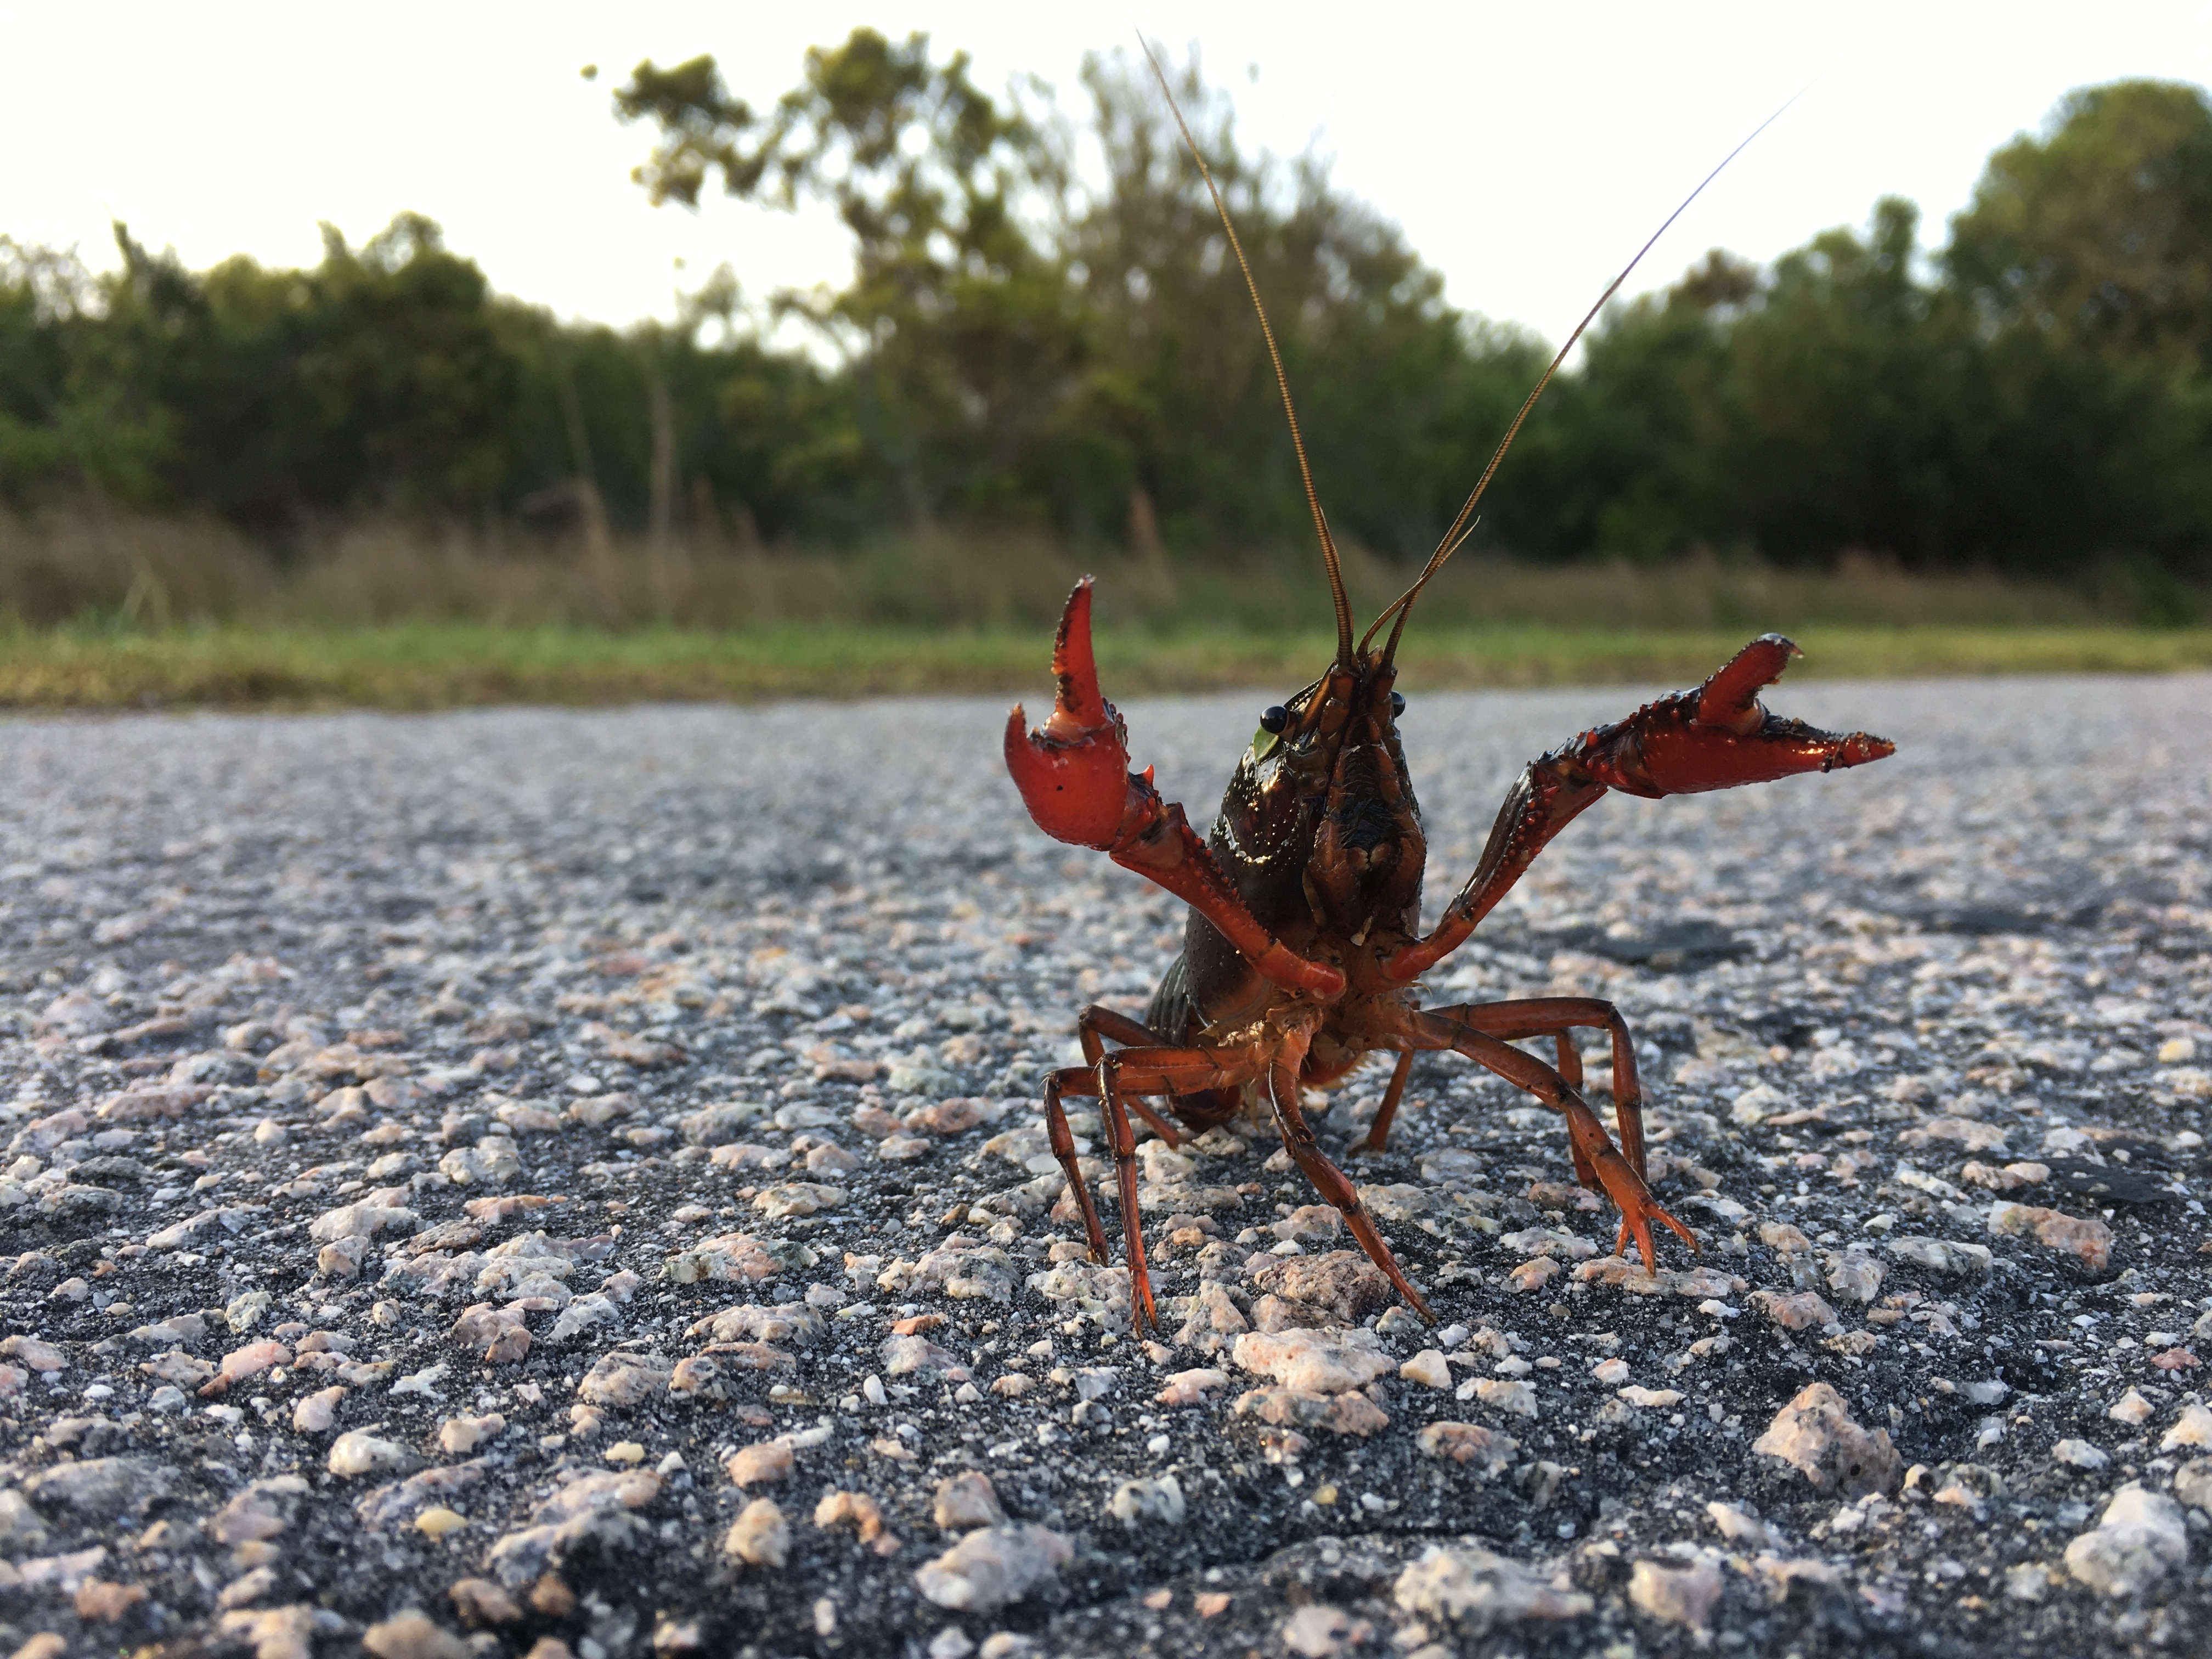 Burrowing crayfish found on Hatteras Island after a large rain storm.